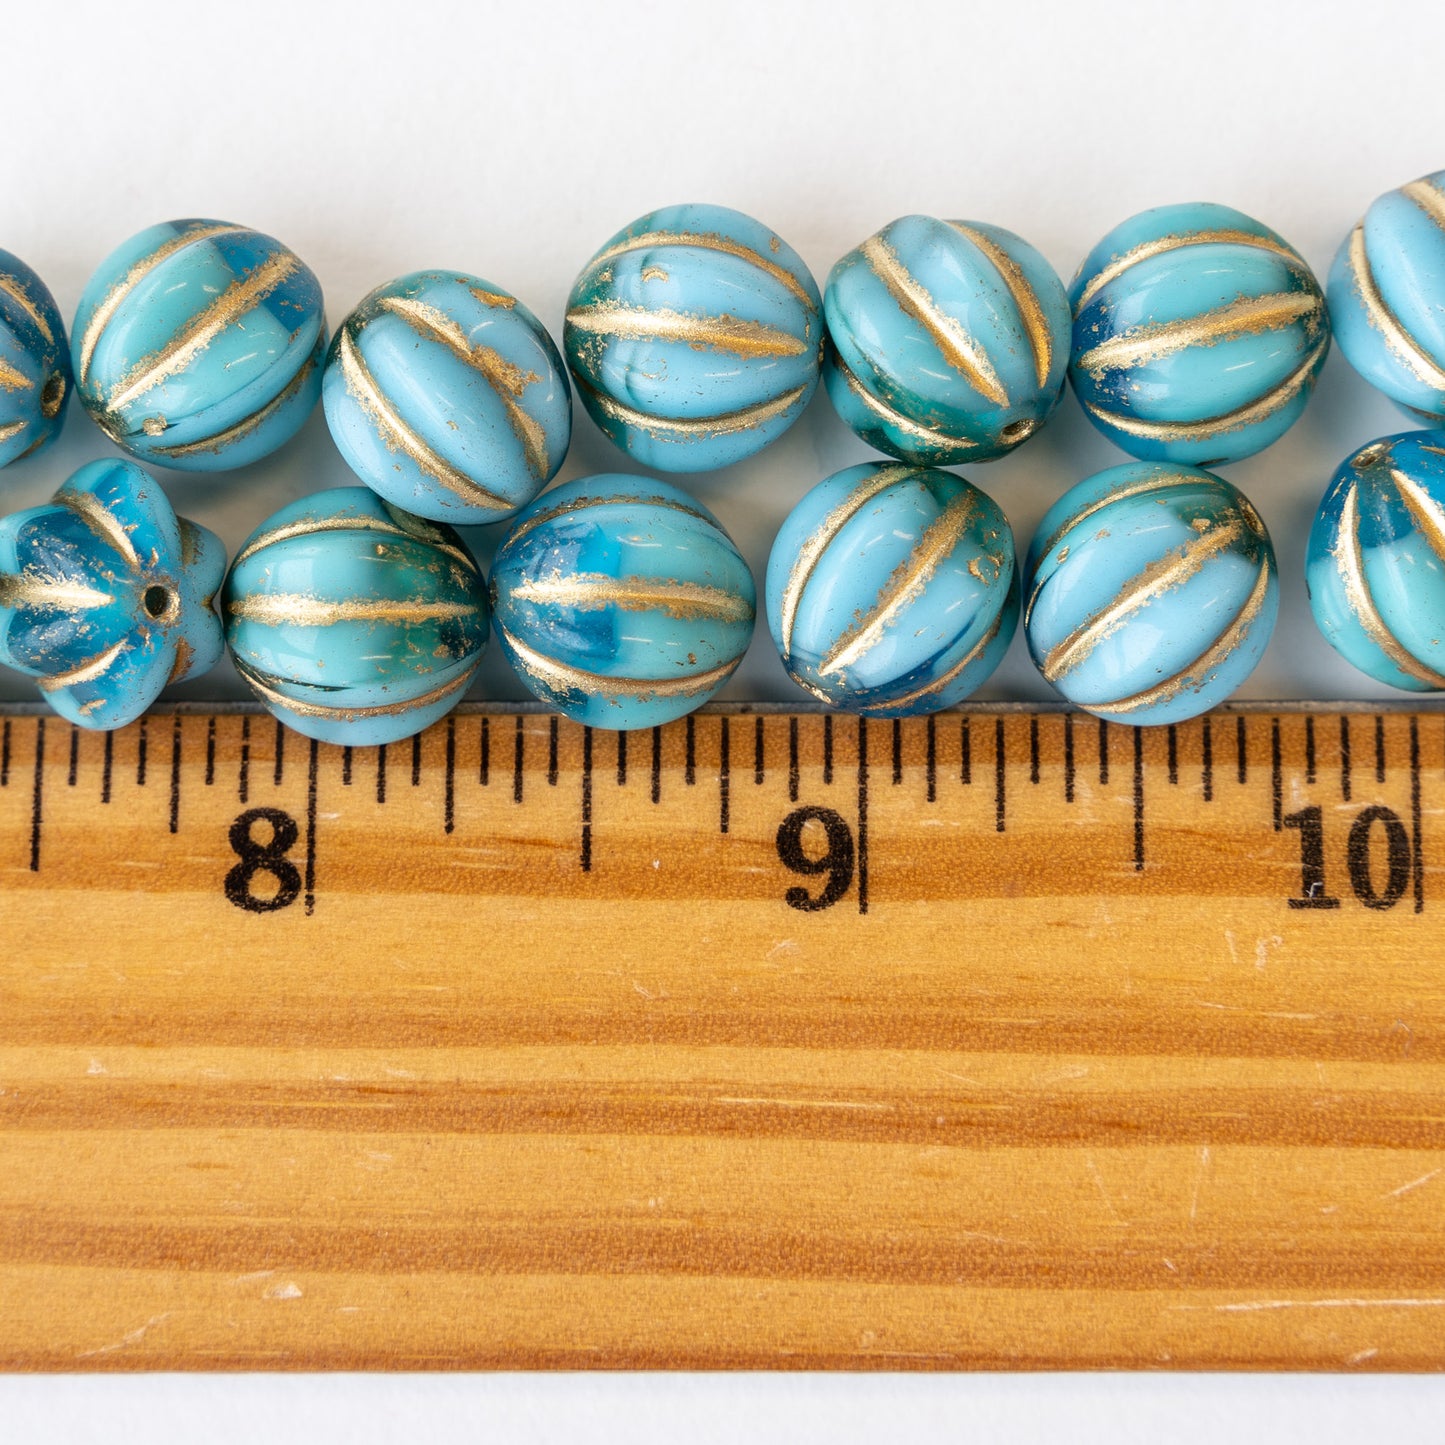 12mm Melon Beads - Blue Green Mix With Gold Wash- 15 Beads